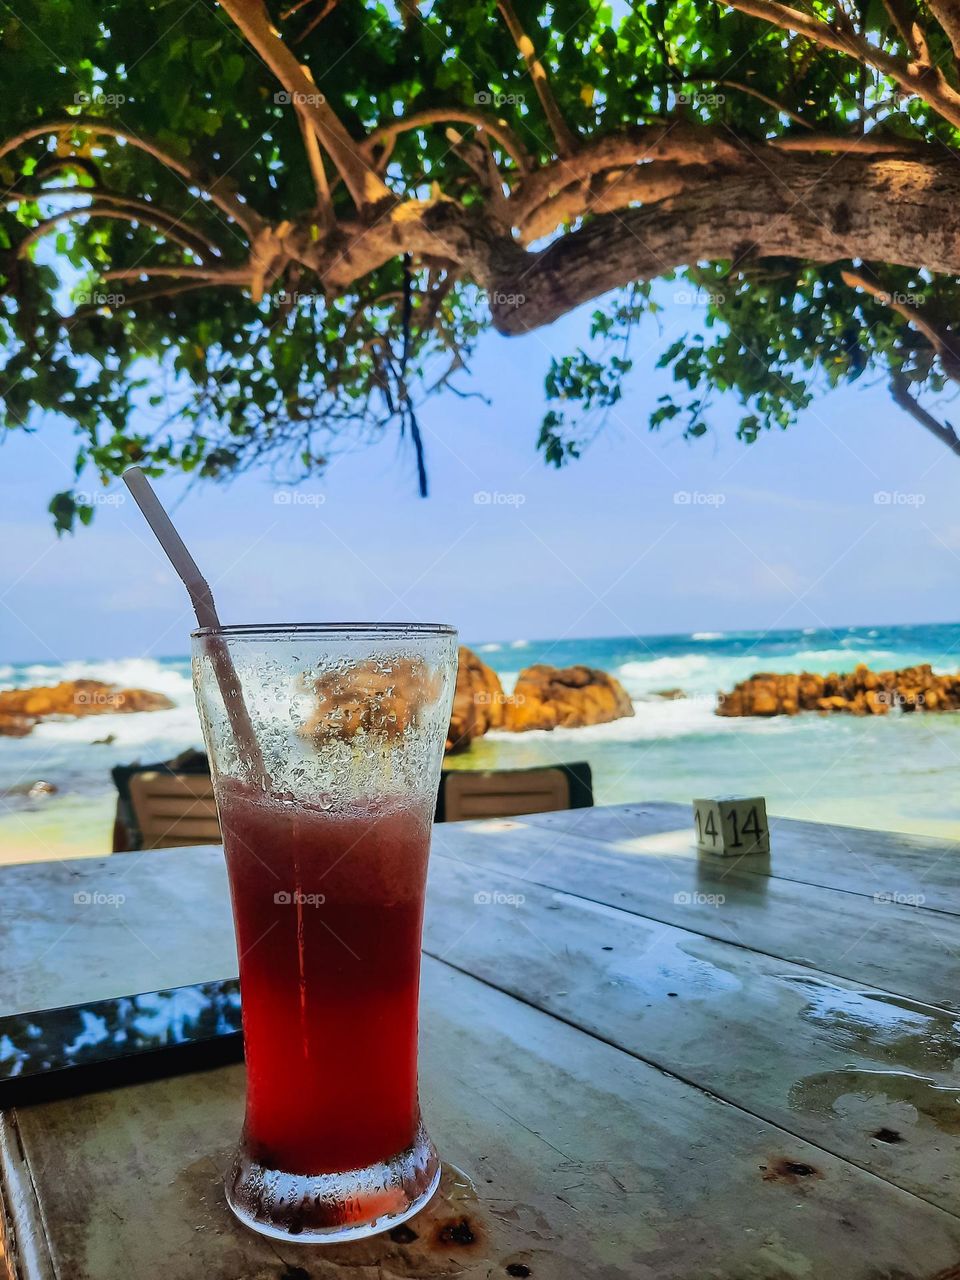 Summer all the way. Perfect hot summer day with a cool, tasty drink under the shade of a tree in the southern beach of Sri Lanka.